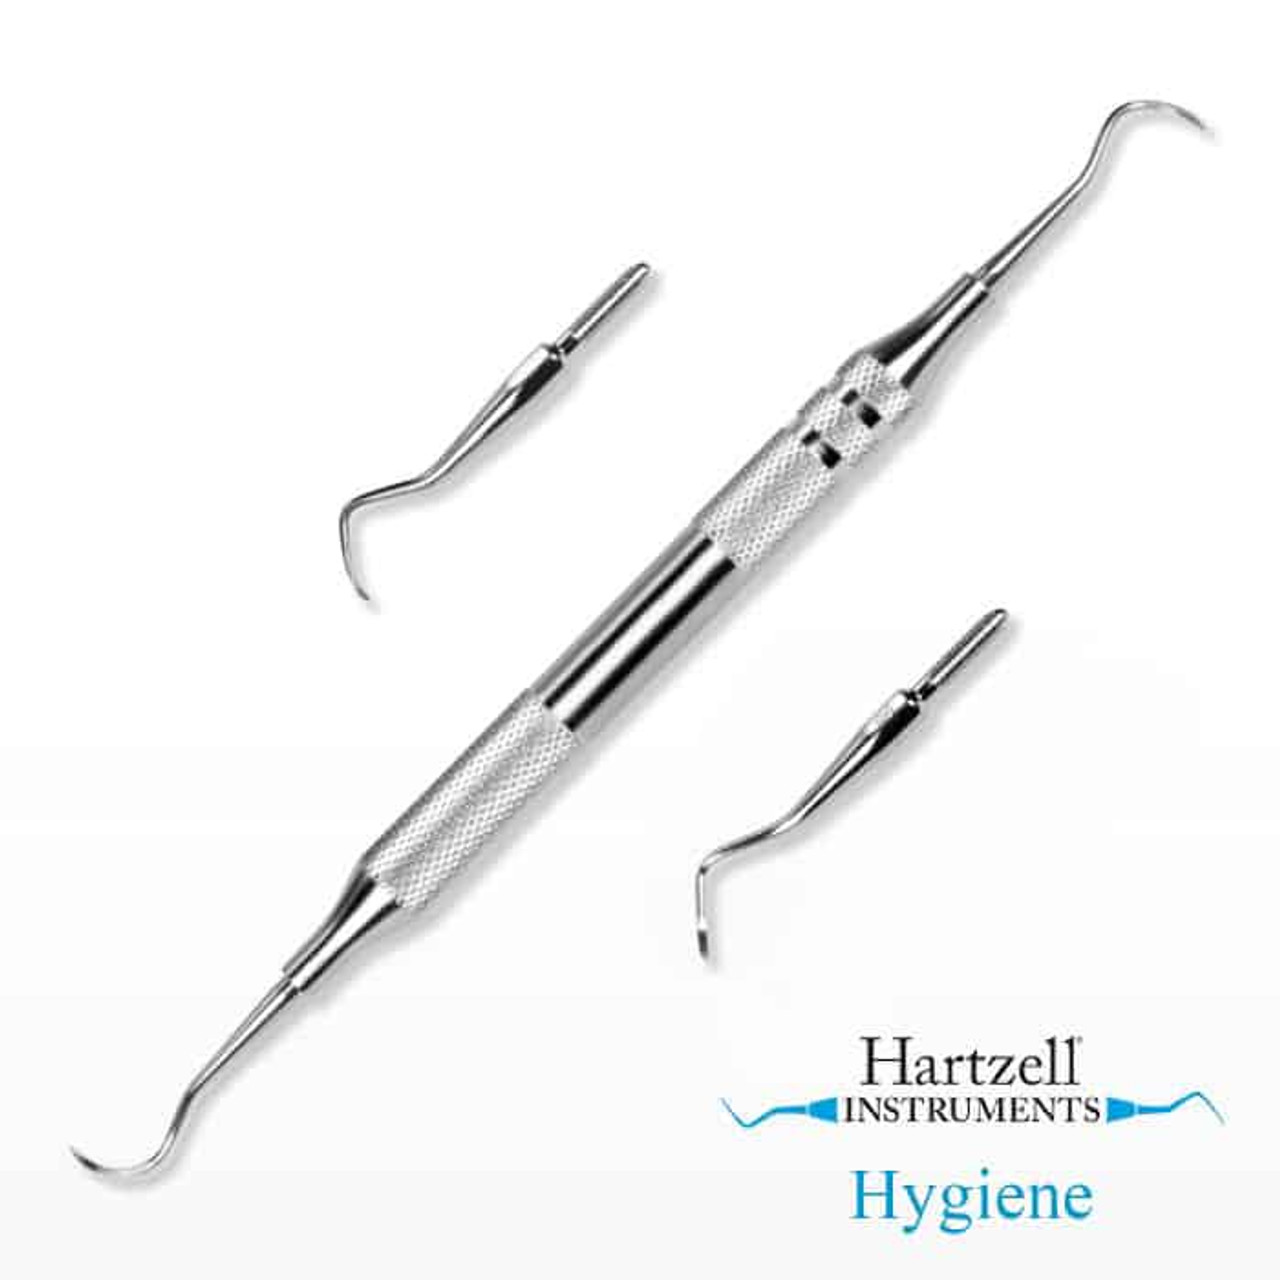 Nordent - Curette Gracey Double End 17/18 DuraLite Round Stainless Steel Each